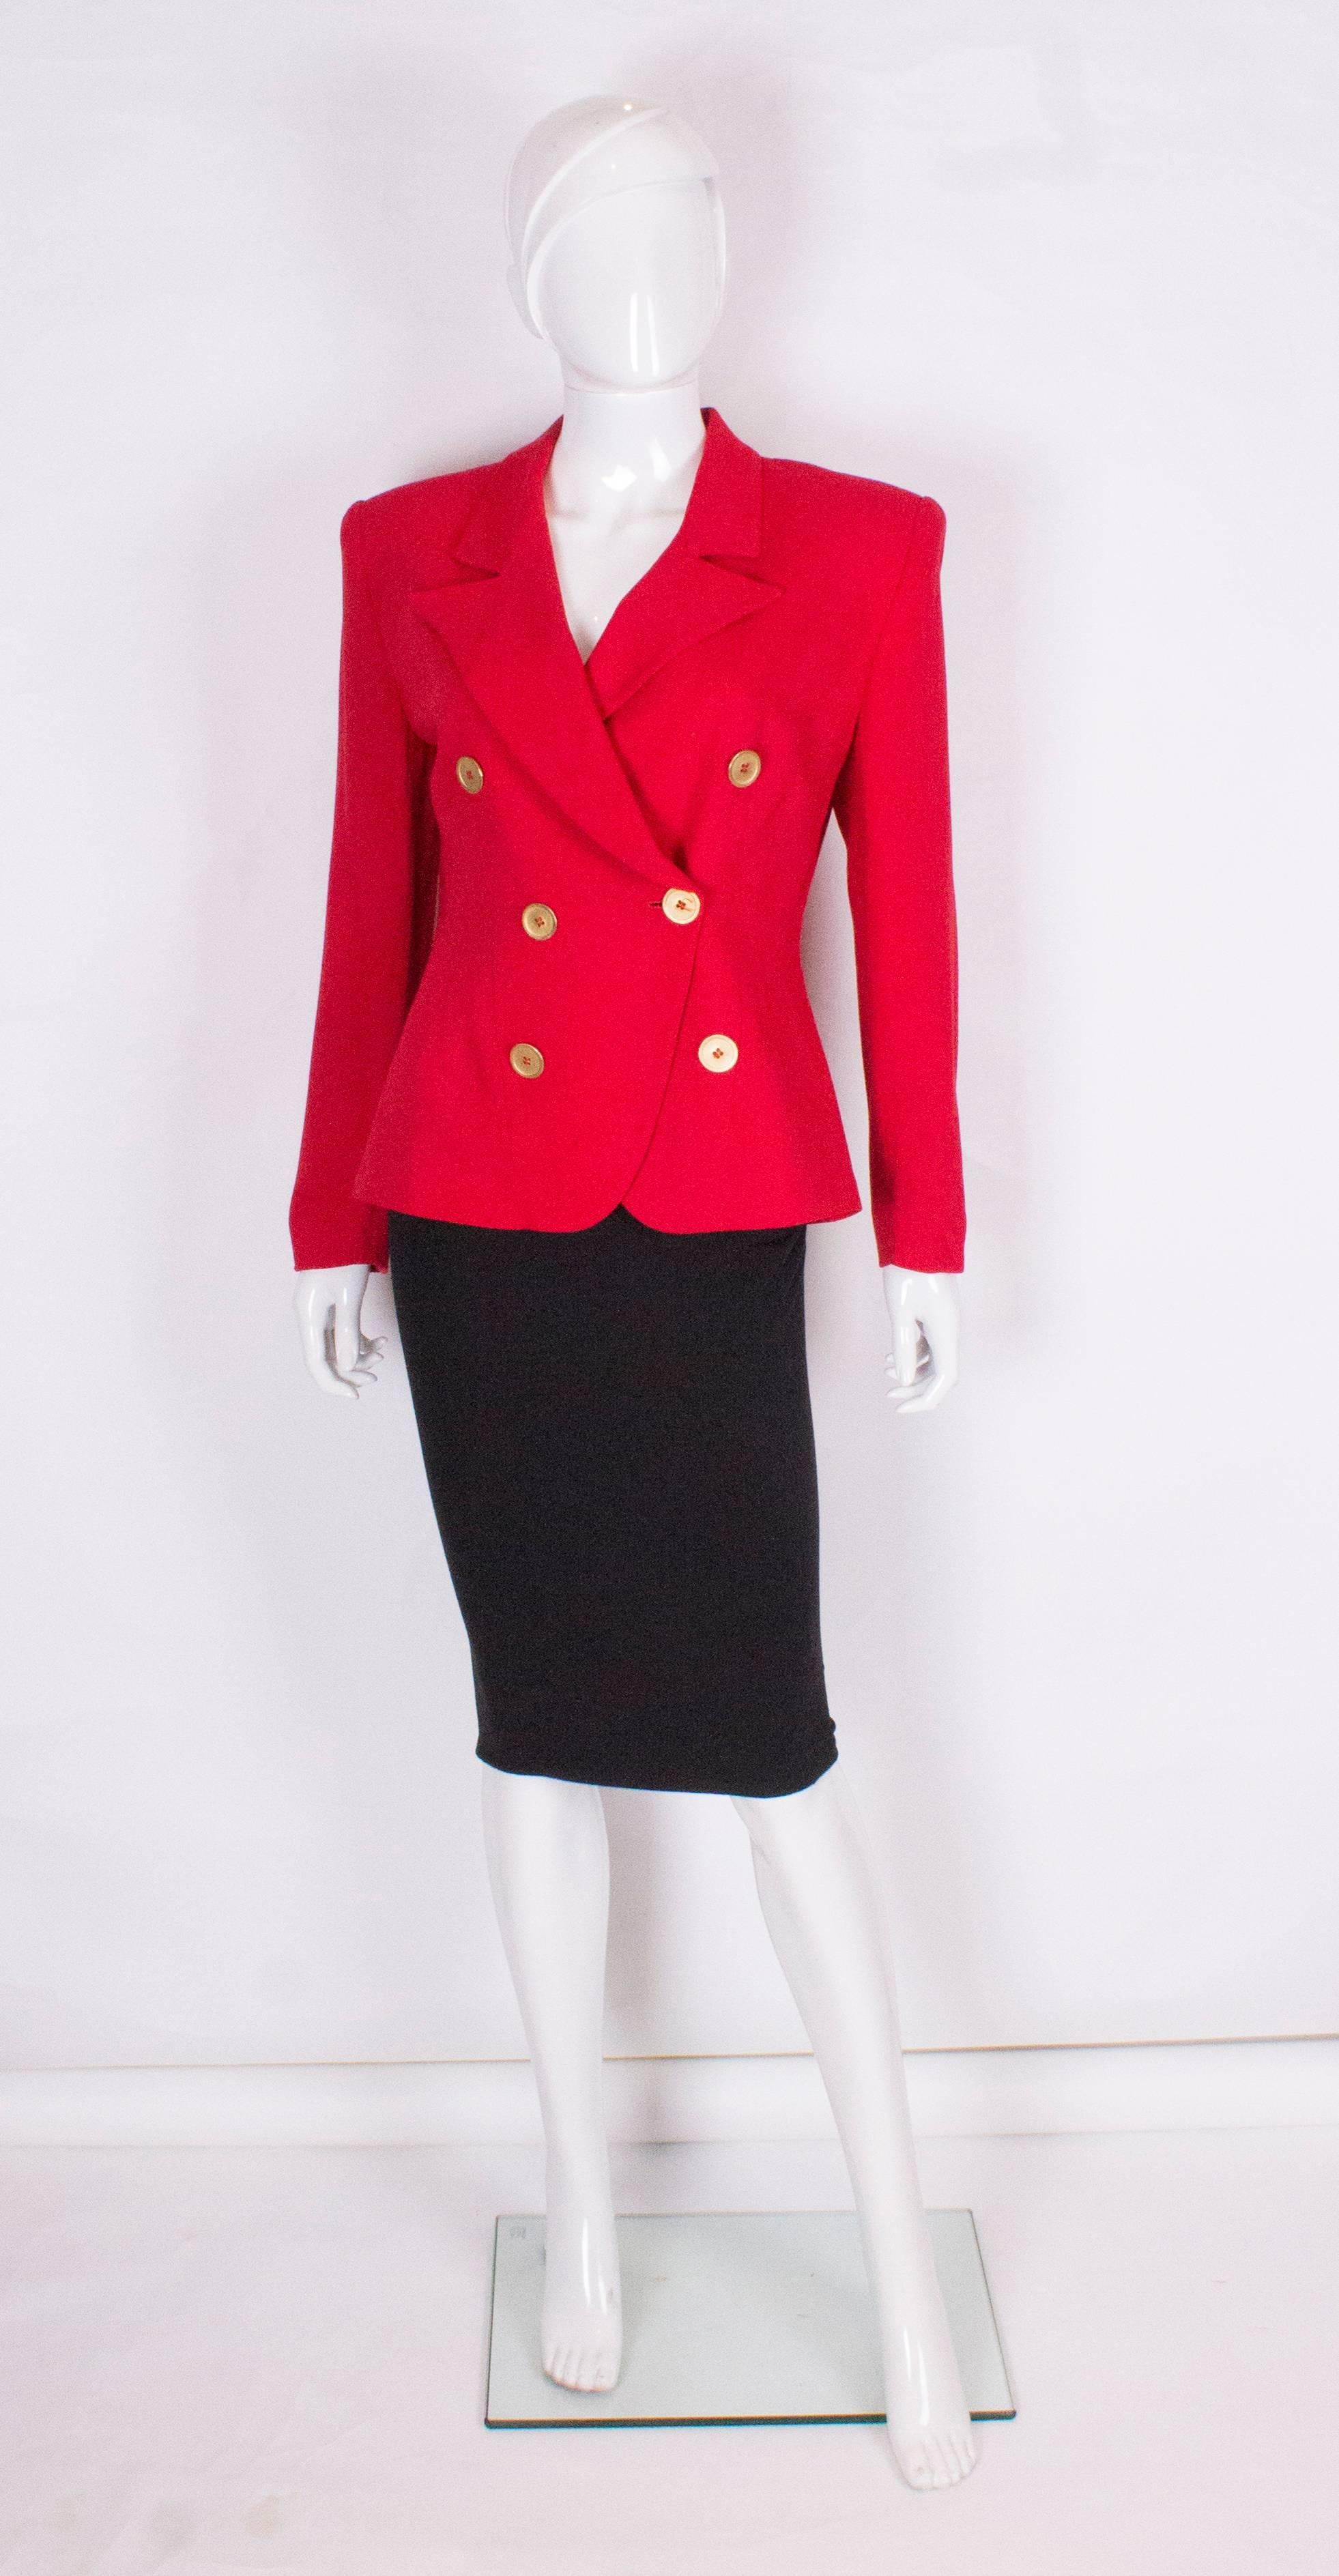 A great red jacket by Christian Dior.The jacket is double breasted with 6 buttons on the front and one on each cuff.The jacket is fully lined, and has an interesting curve design at the front.